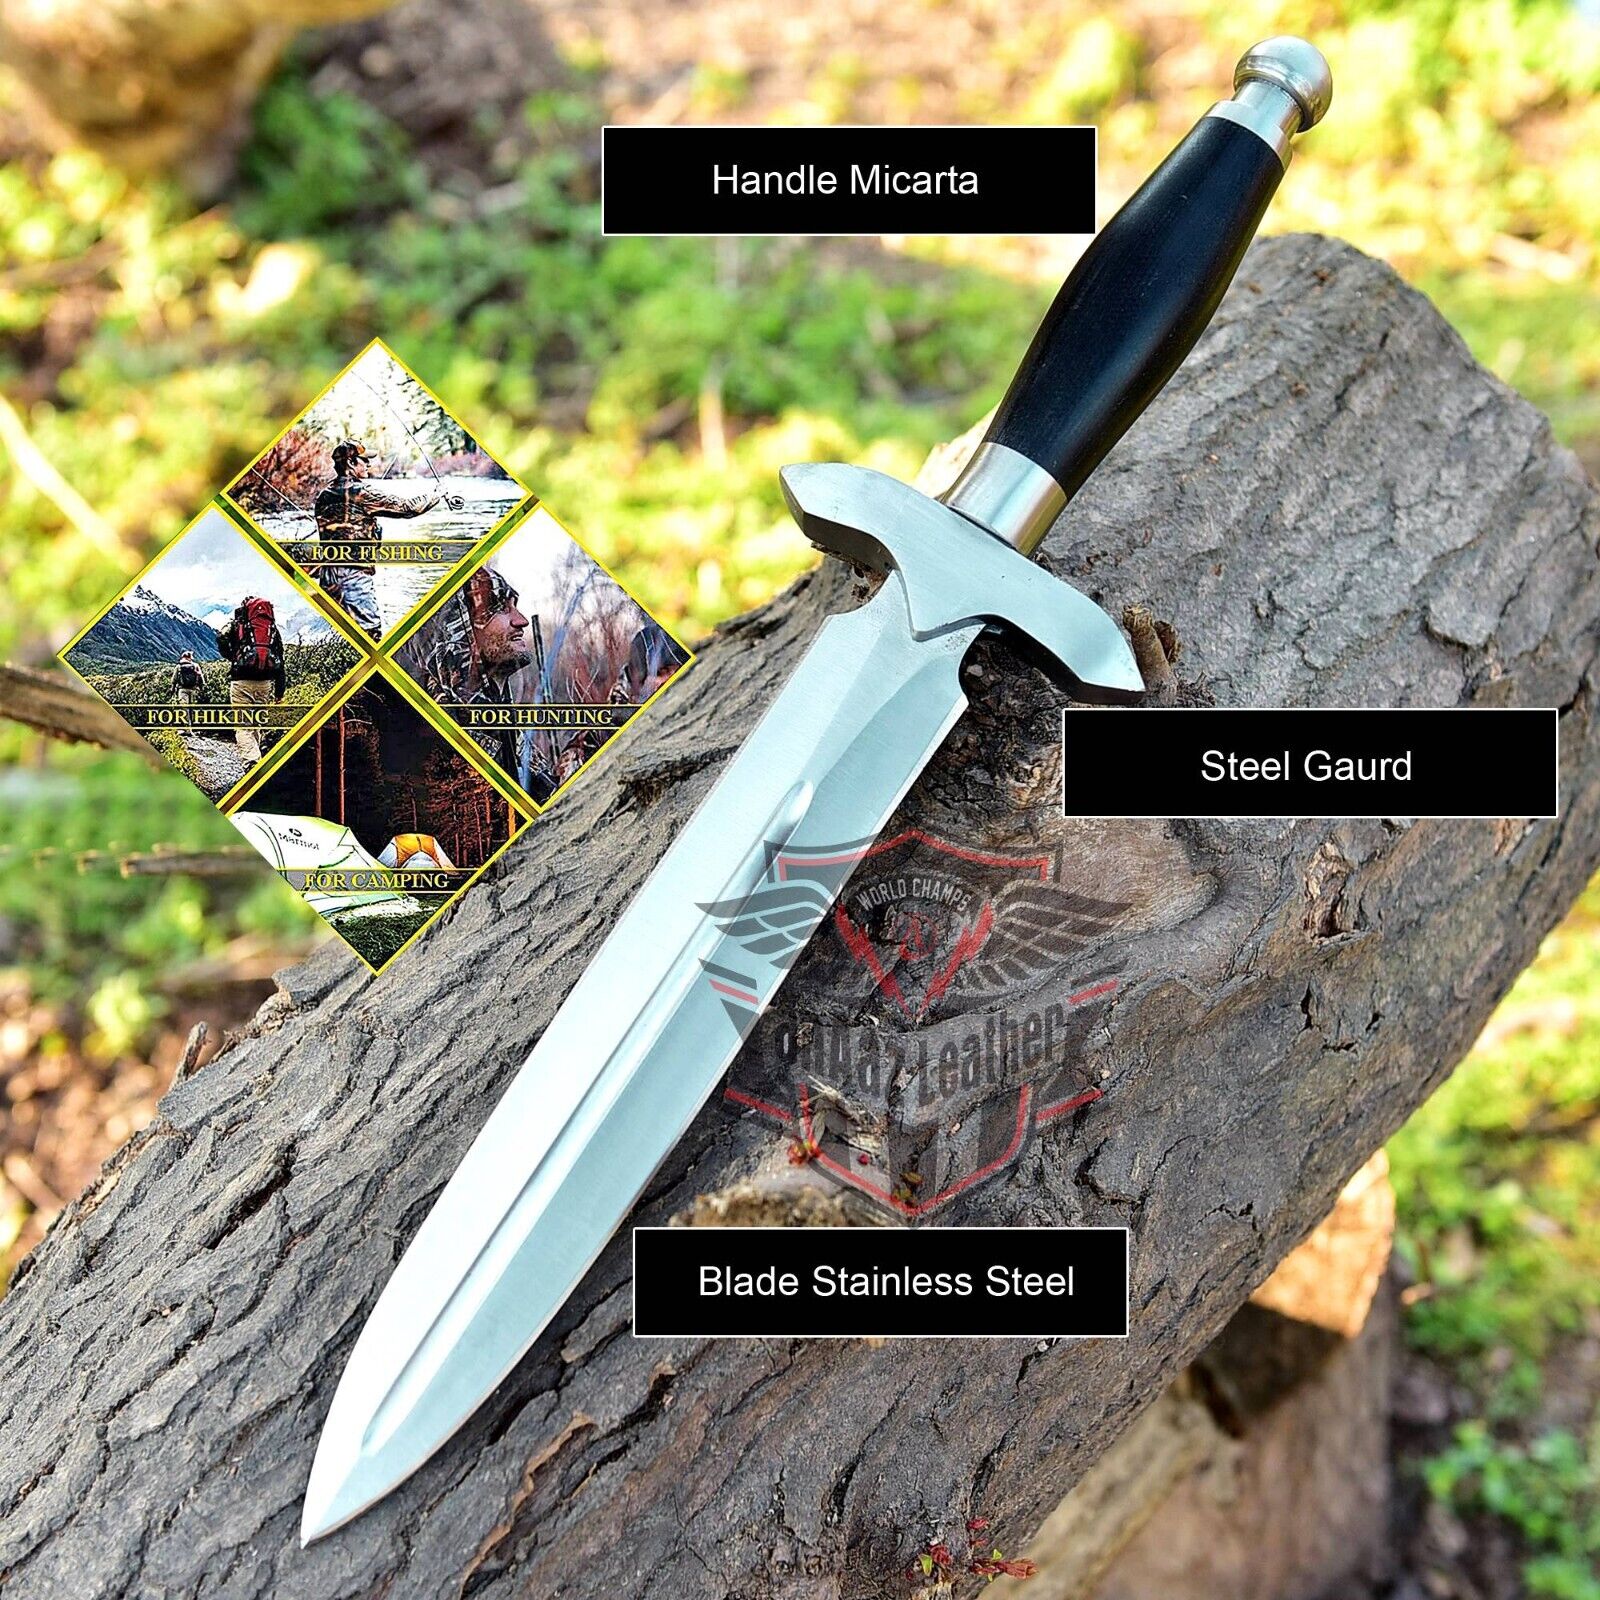 HANDCRAFTED D2 STEEL HUNTING DAGGER BOWIE KNIFE WITH MICARTA HANDLE & SHEATH